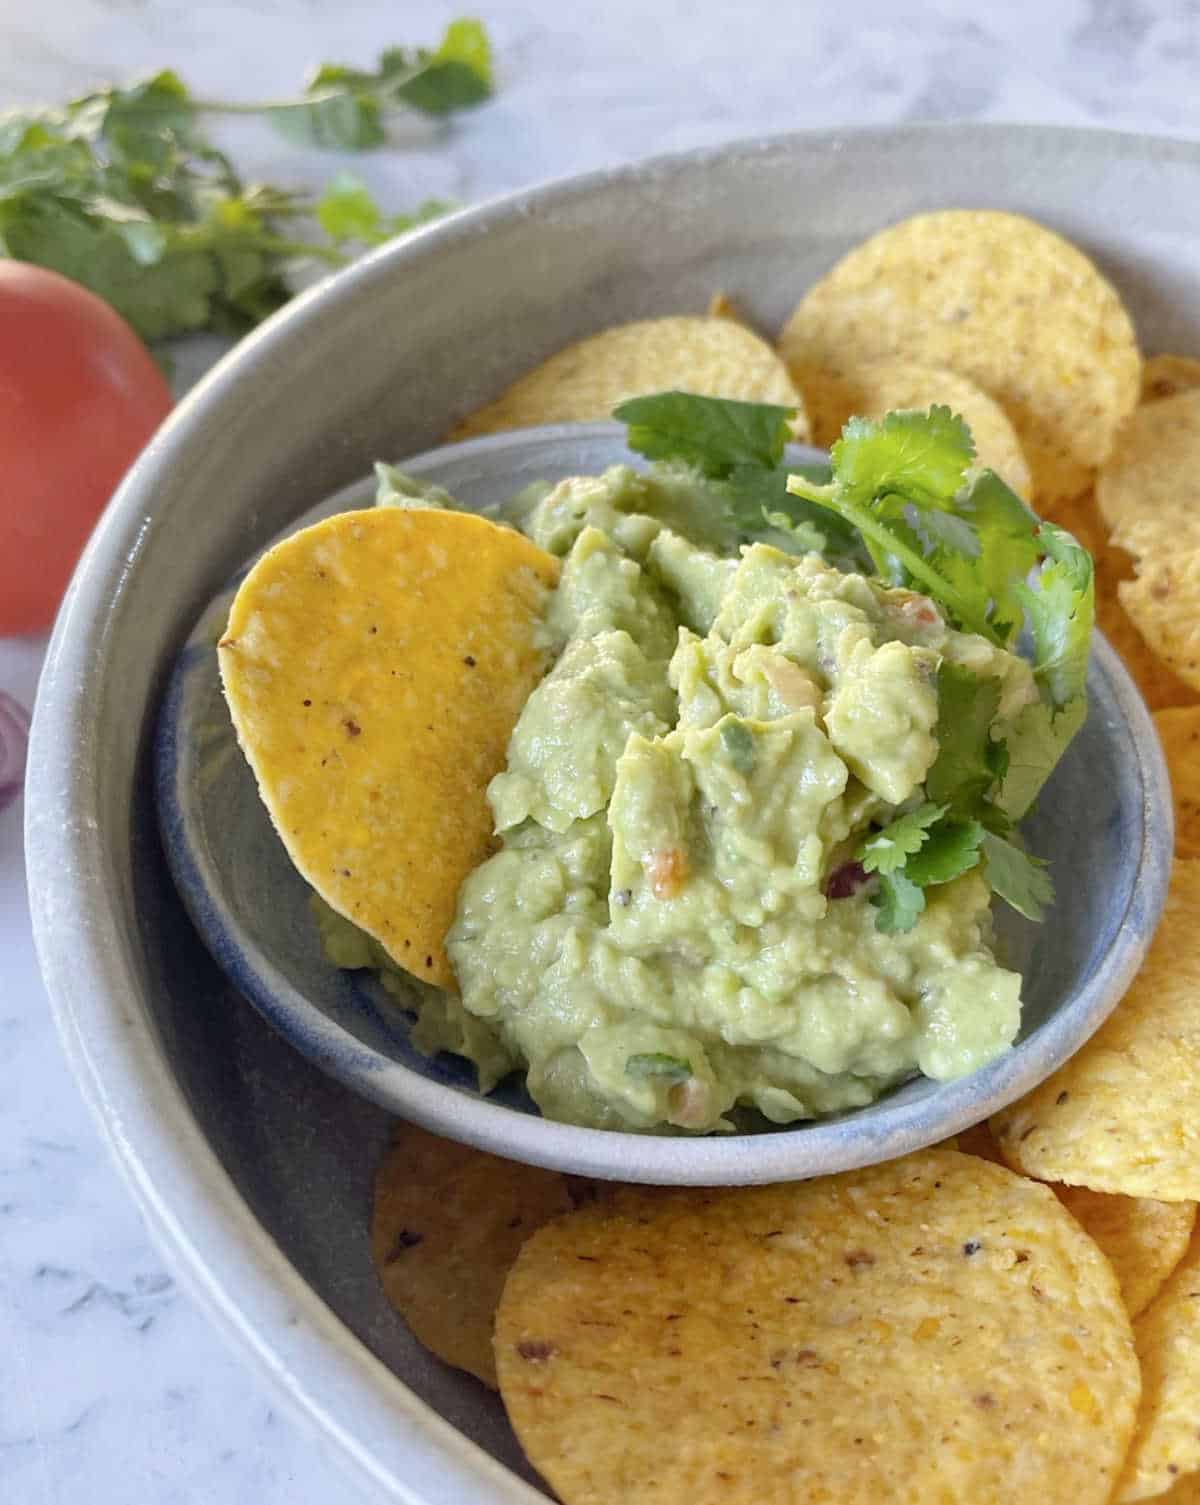 Guacamole in a small bowl sitting inside a large bowl of corn chips.